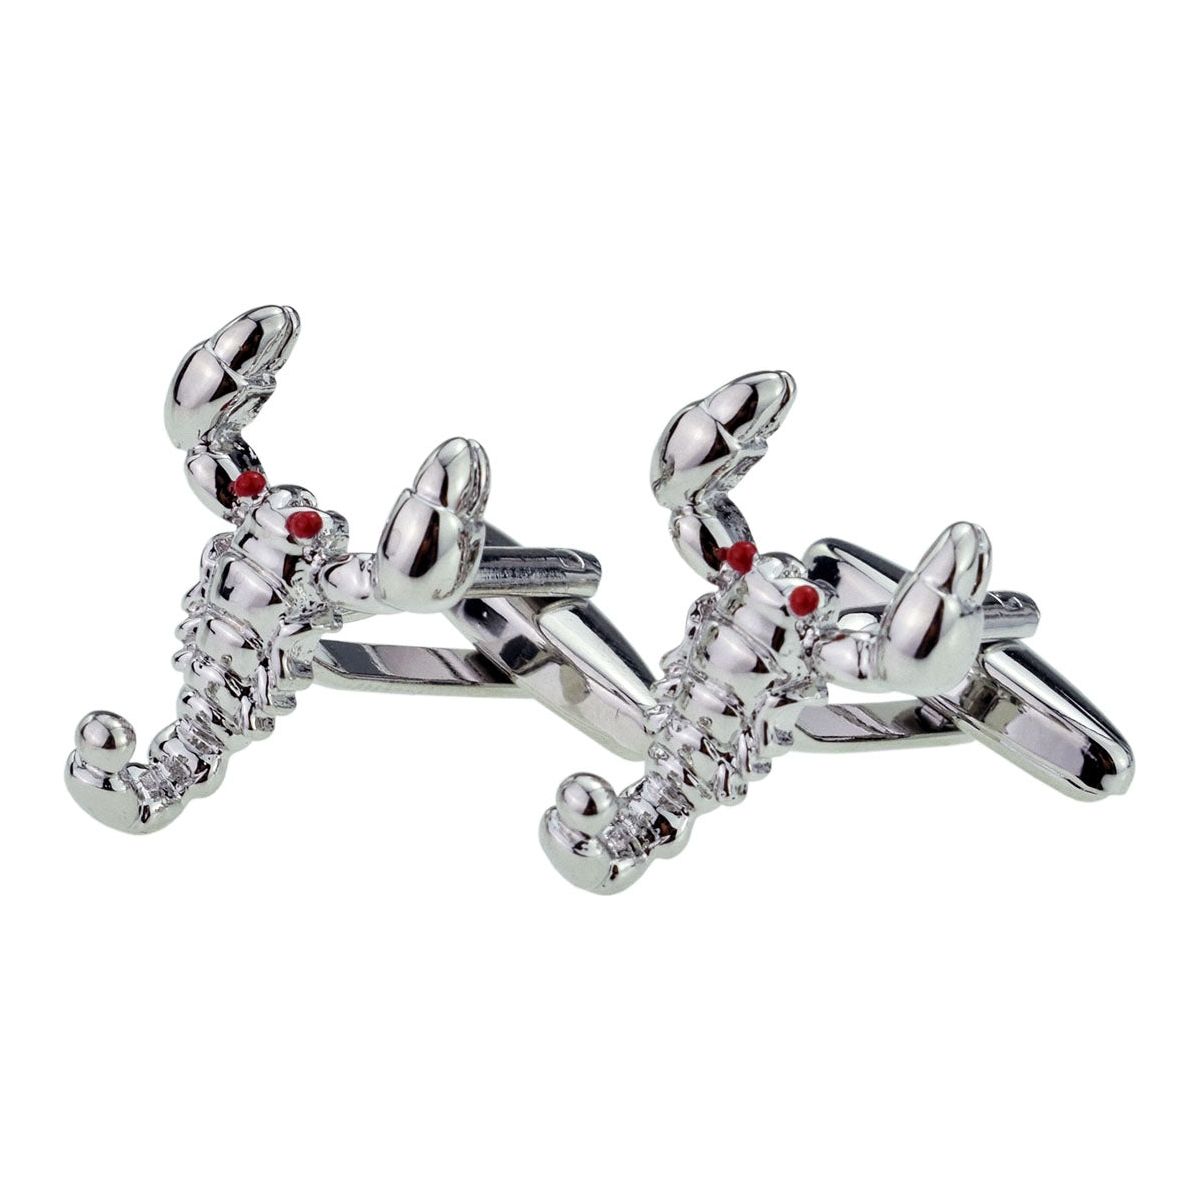 High Detailed Scorpion Cufflinks with Red Enamel Eyes - Ashton and Finch